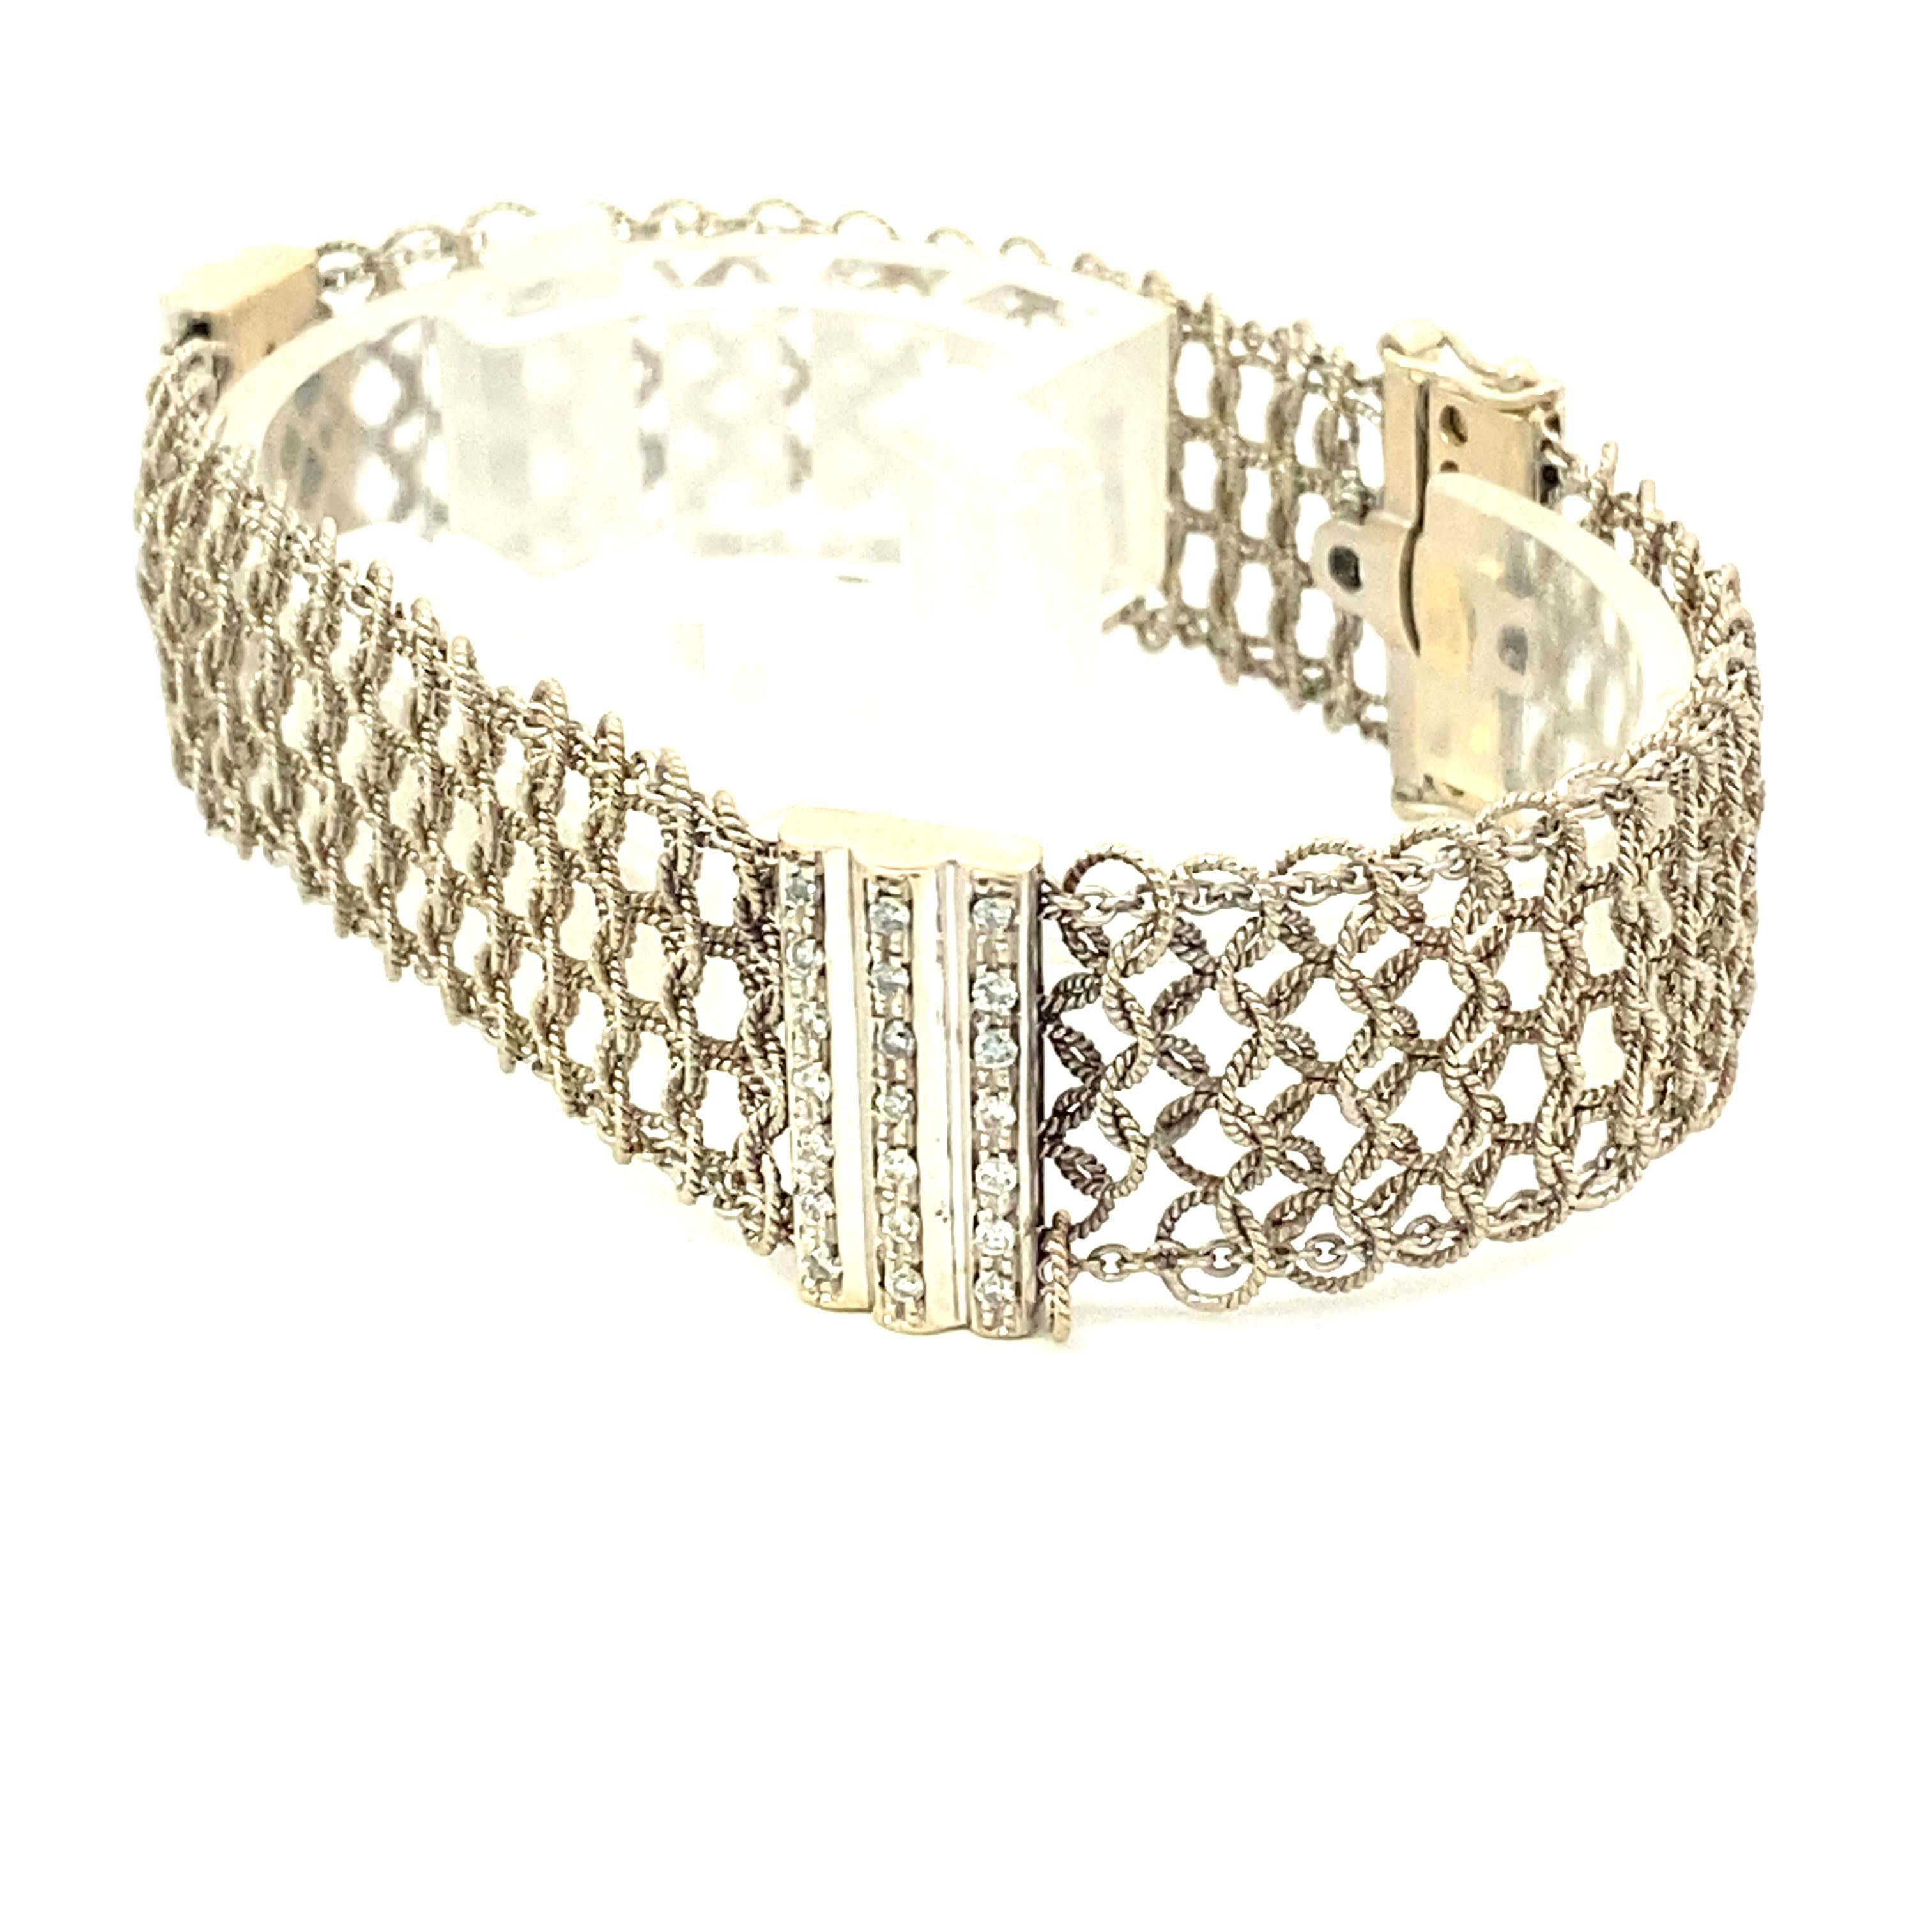 Art Deco 18k white gold mesh bracelet with 0.80 carat total weight diamonds, and 0.36 carat total weight cabochon sapphires with double safety eight clasp. 15.2Dwt. Length 7